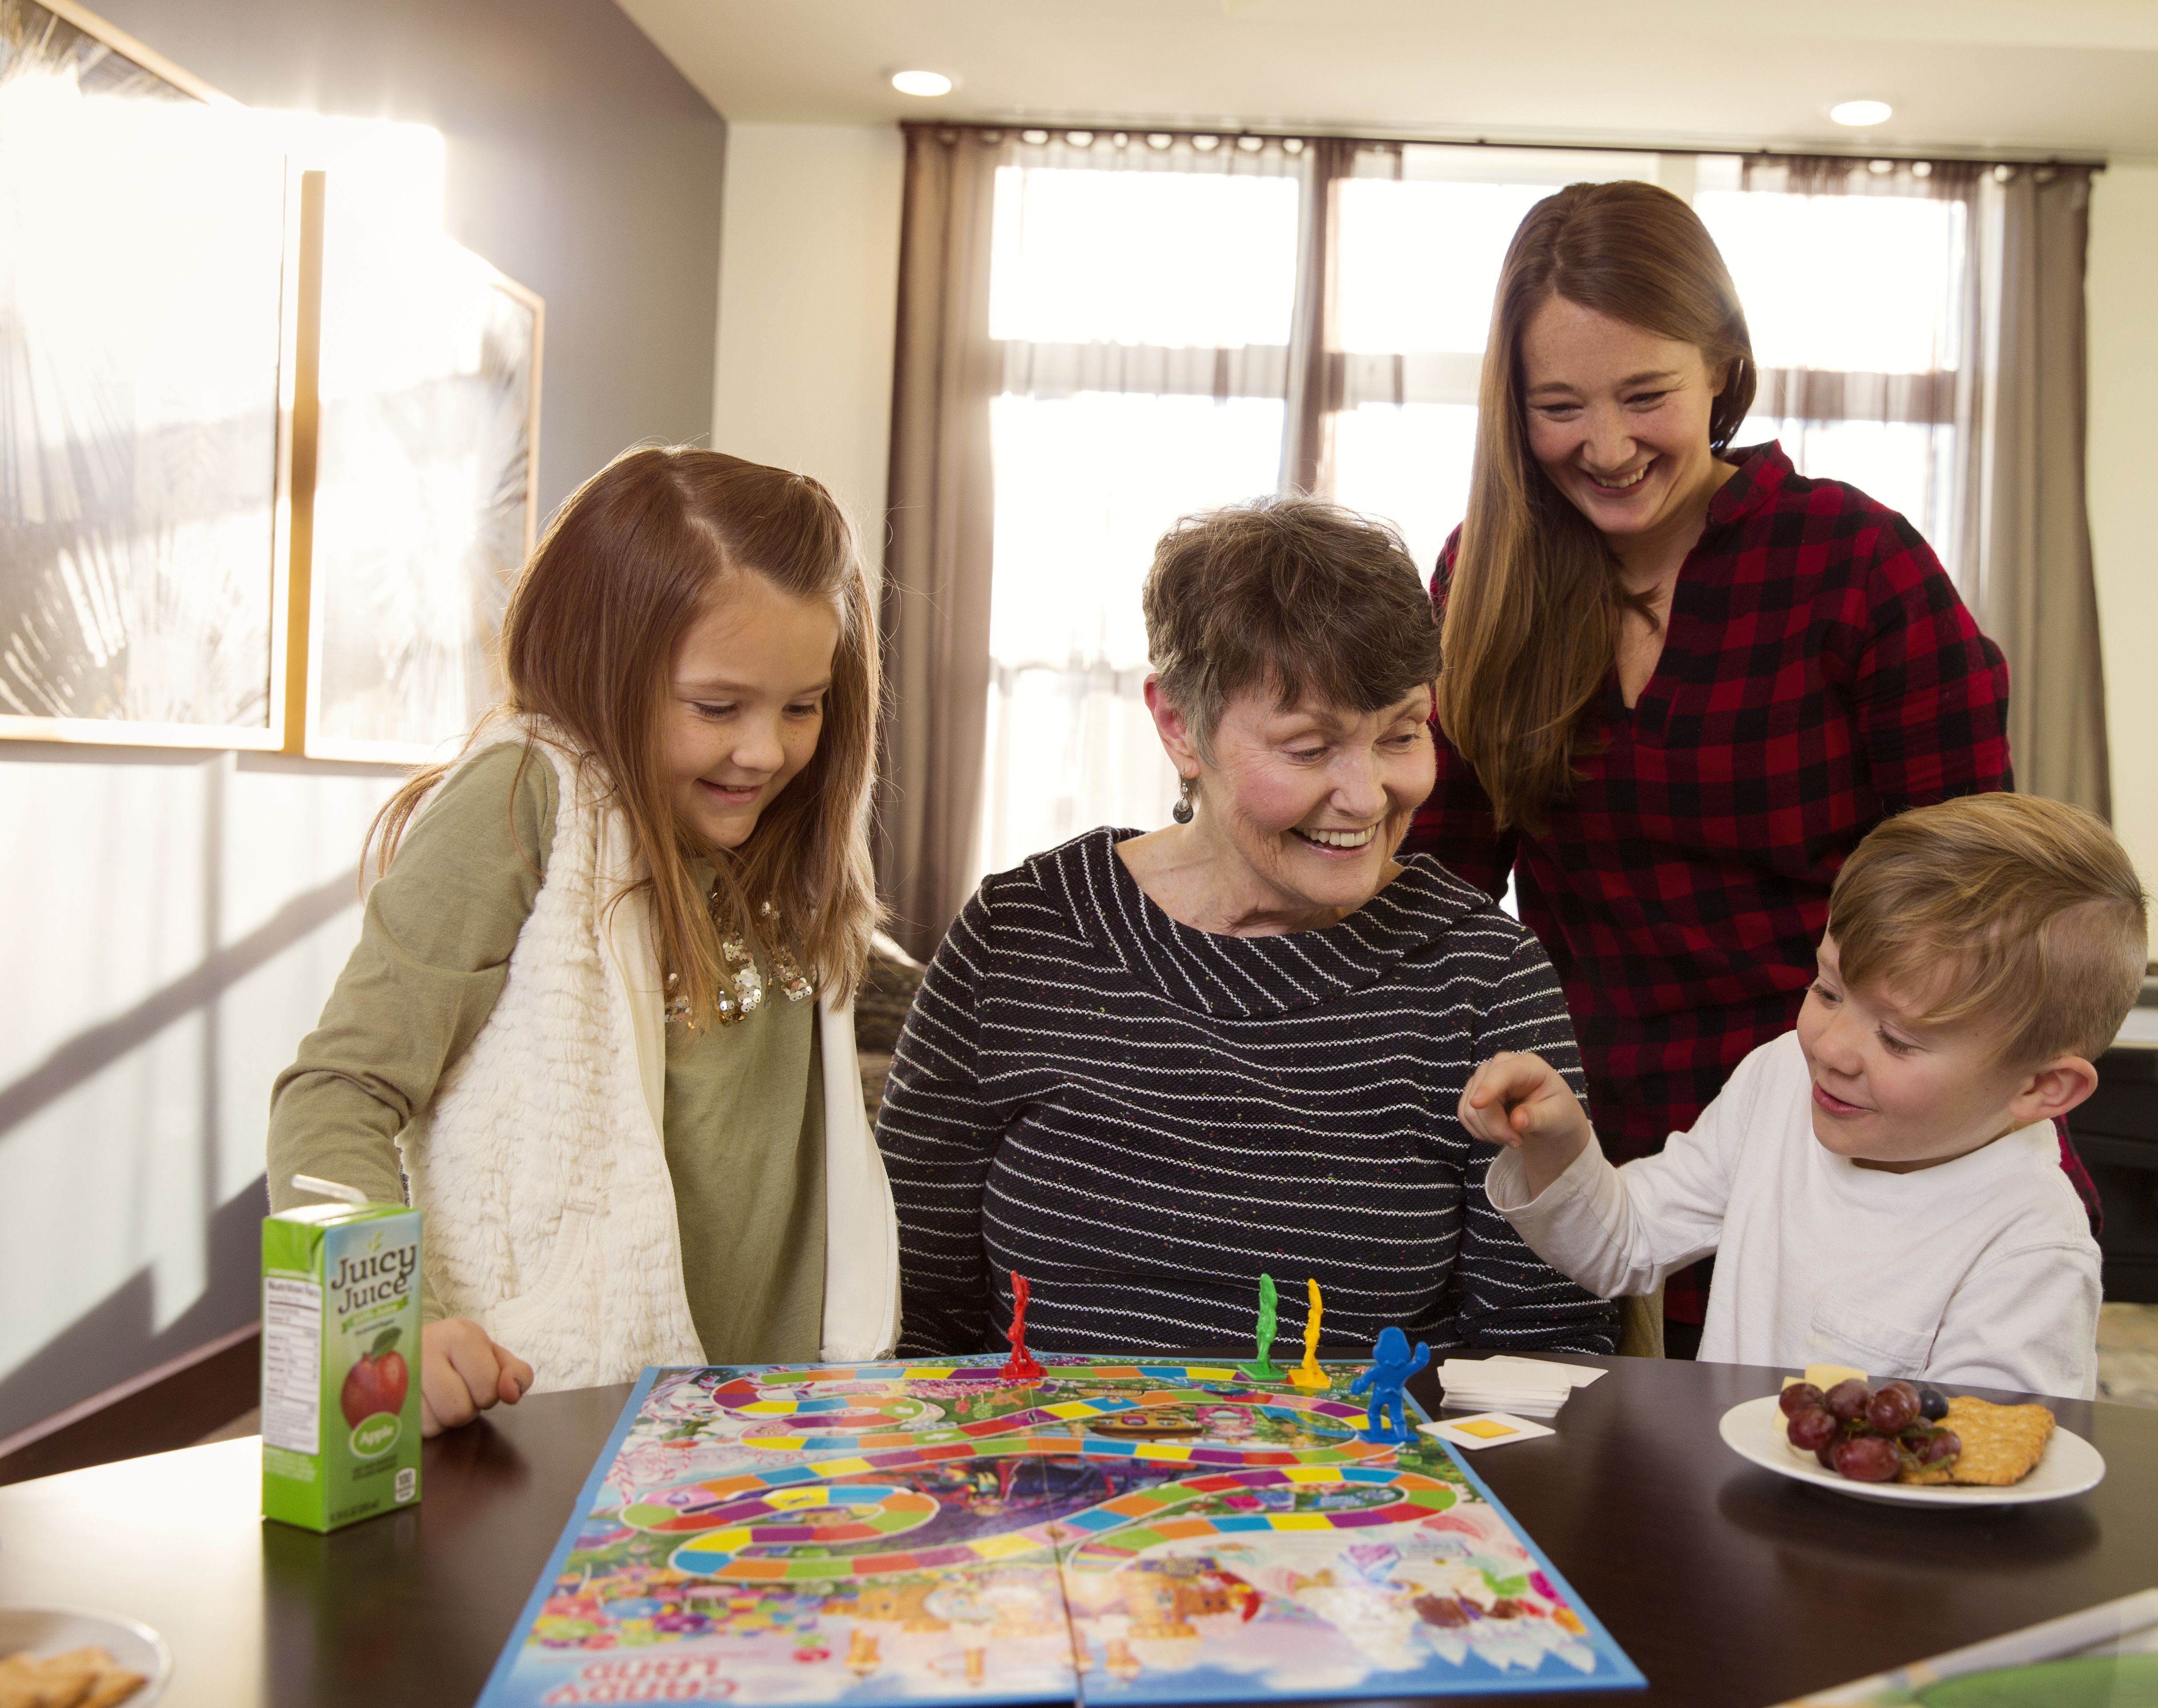 Arbor resident playing a board game with her family